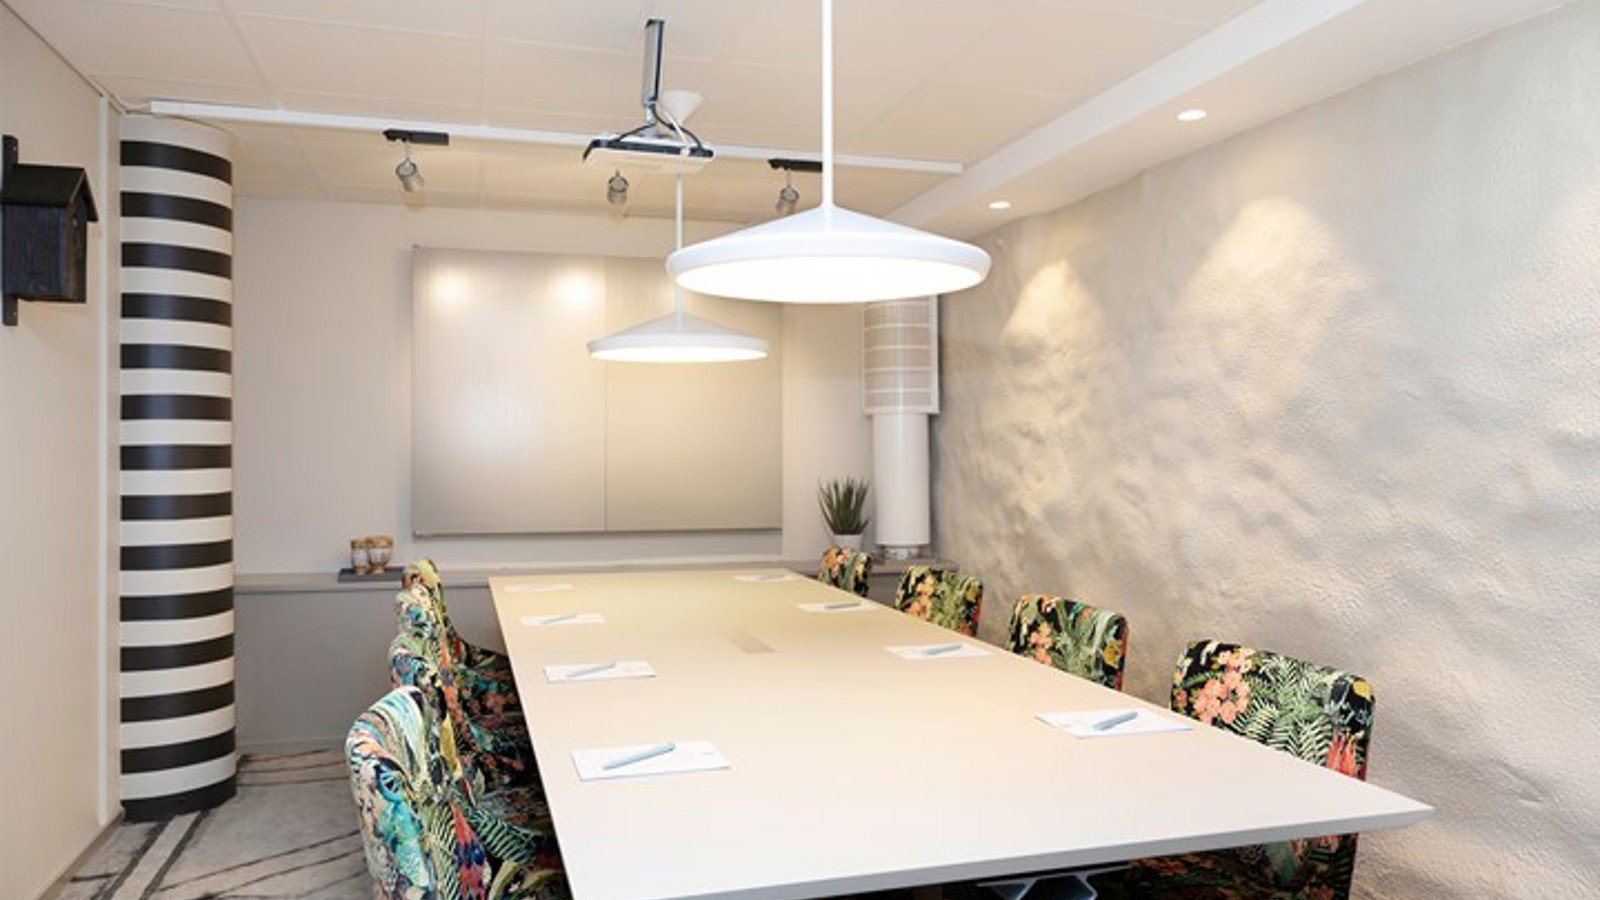 Conference room with board seating, white table, white walls and patterned chairs